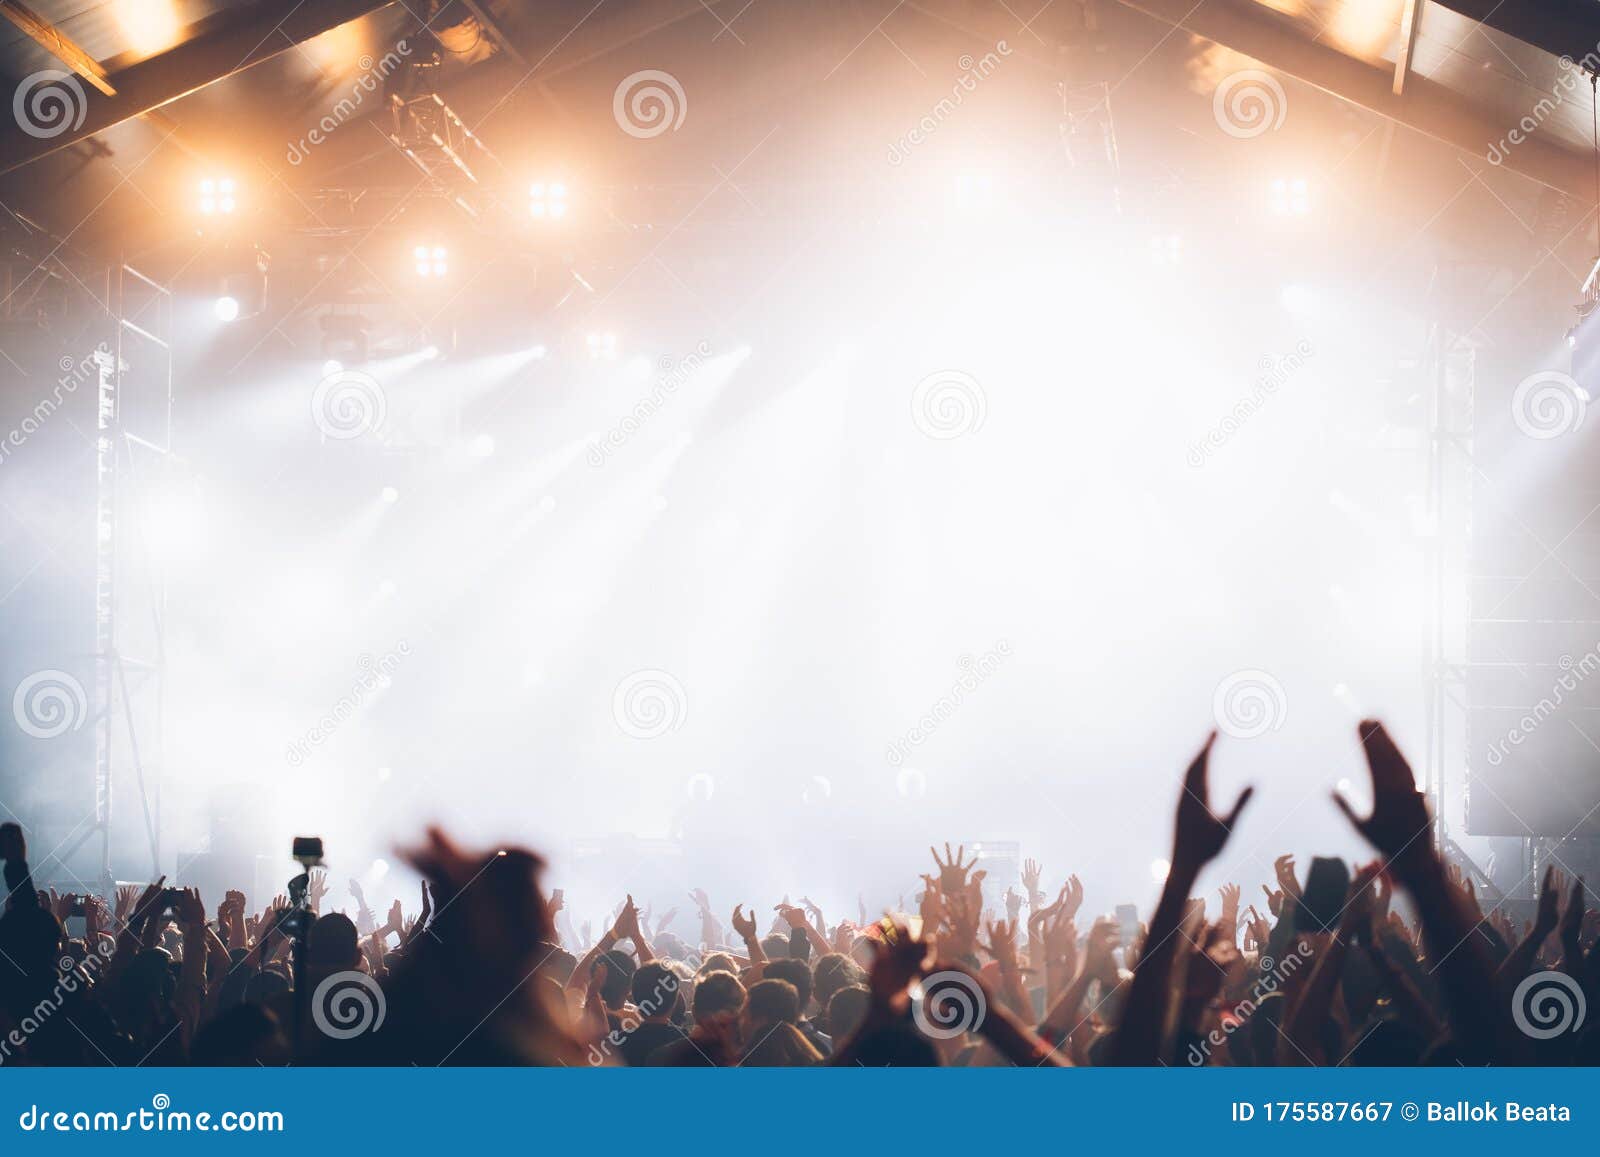 Stage Lights and Crowd of Audience with Hands Raised at a Music ...